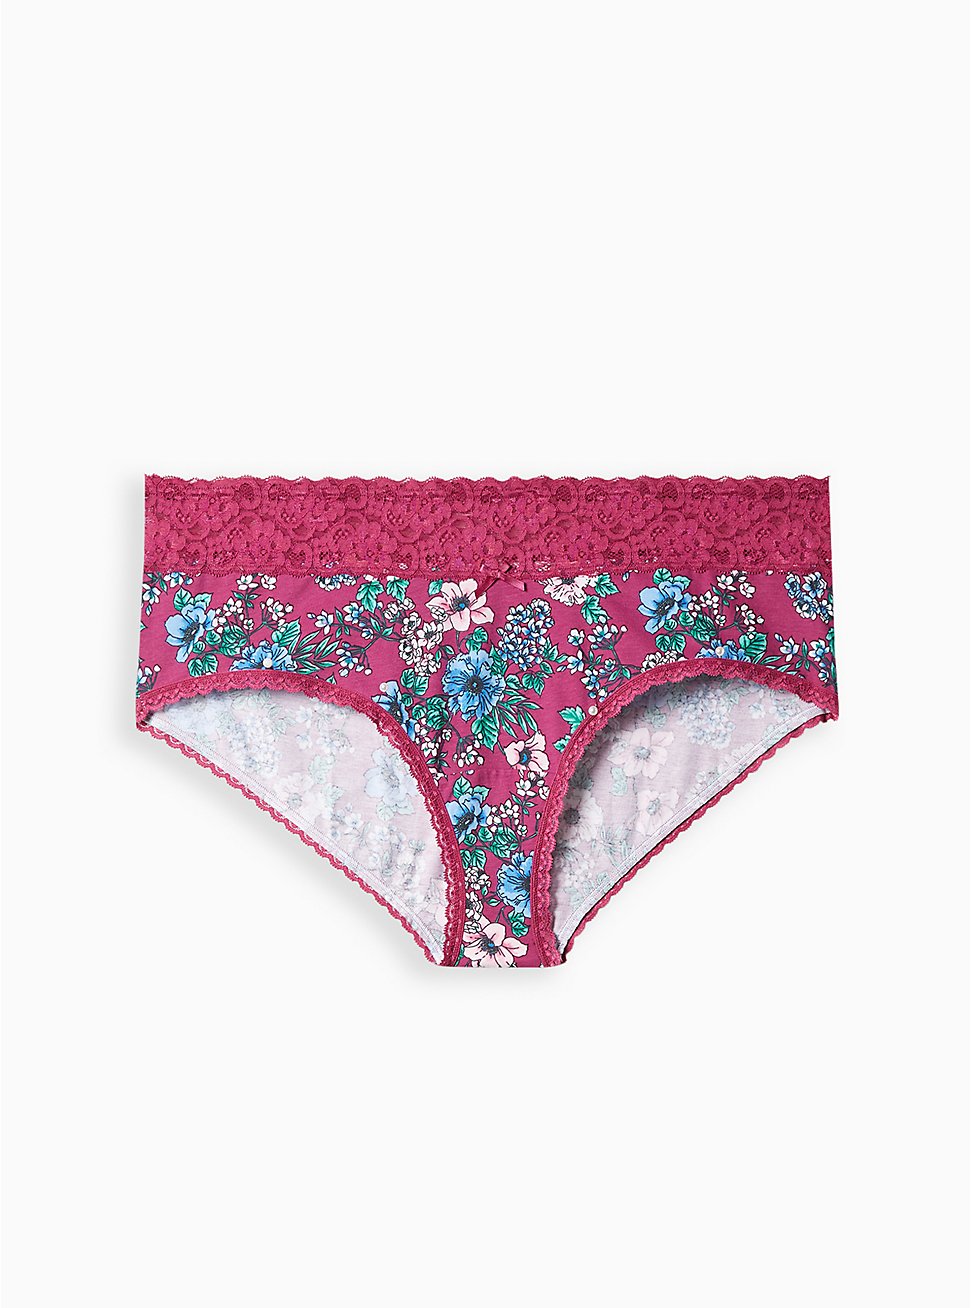 Cotton Mid-Rise Cheeky Lace Trim Panty, STAND OUT FLORAL PURPLE, hi-res